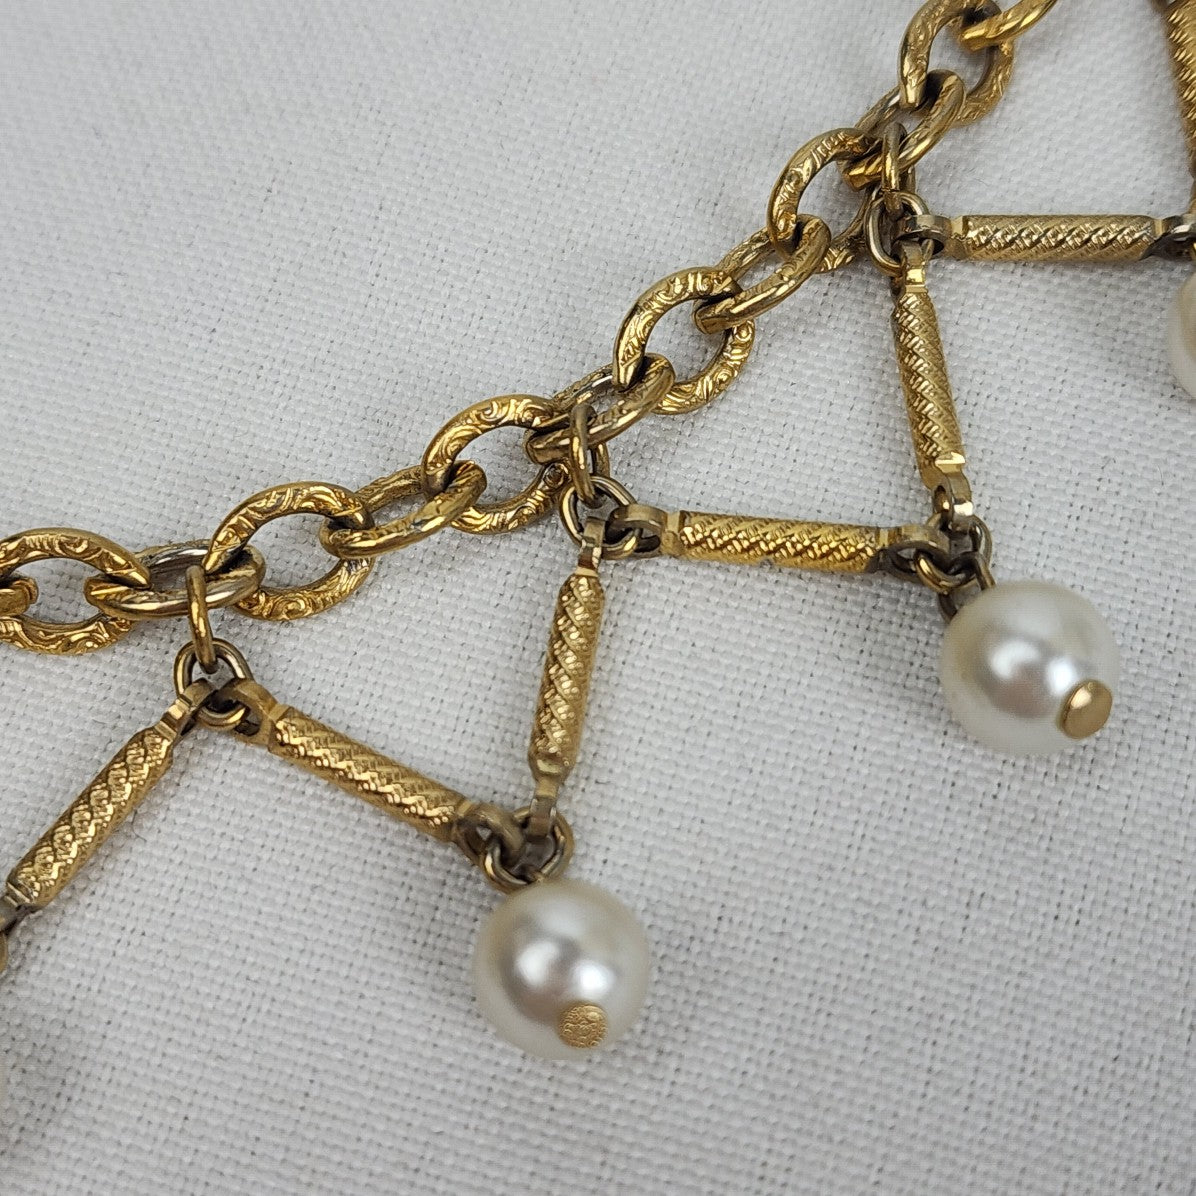 Vintage Gold Tone Dangle Faux Pearl Collar Necklace